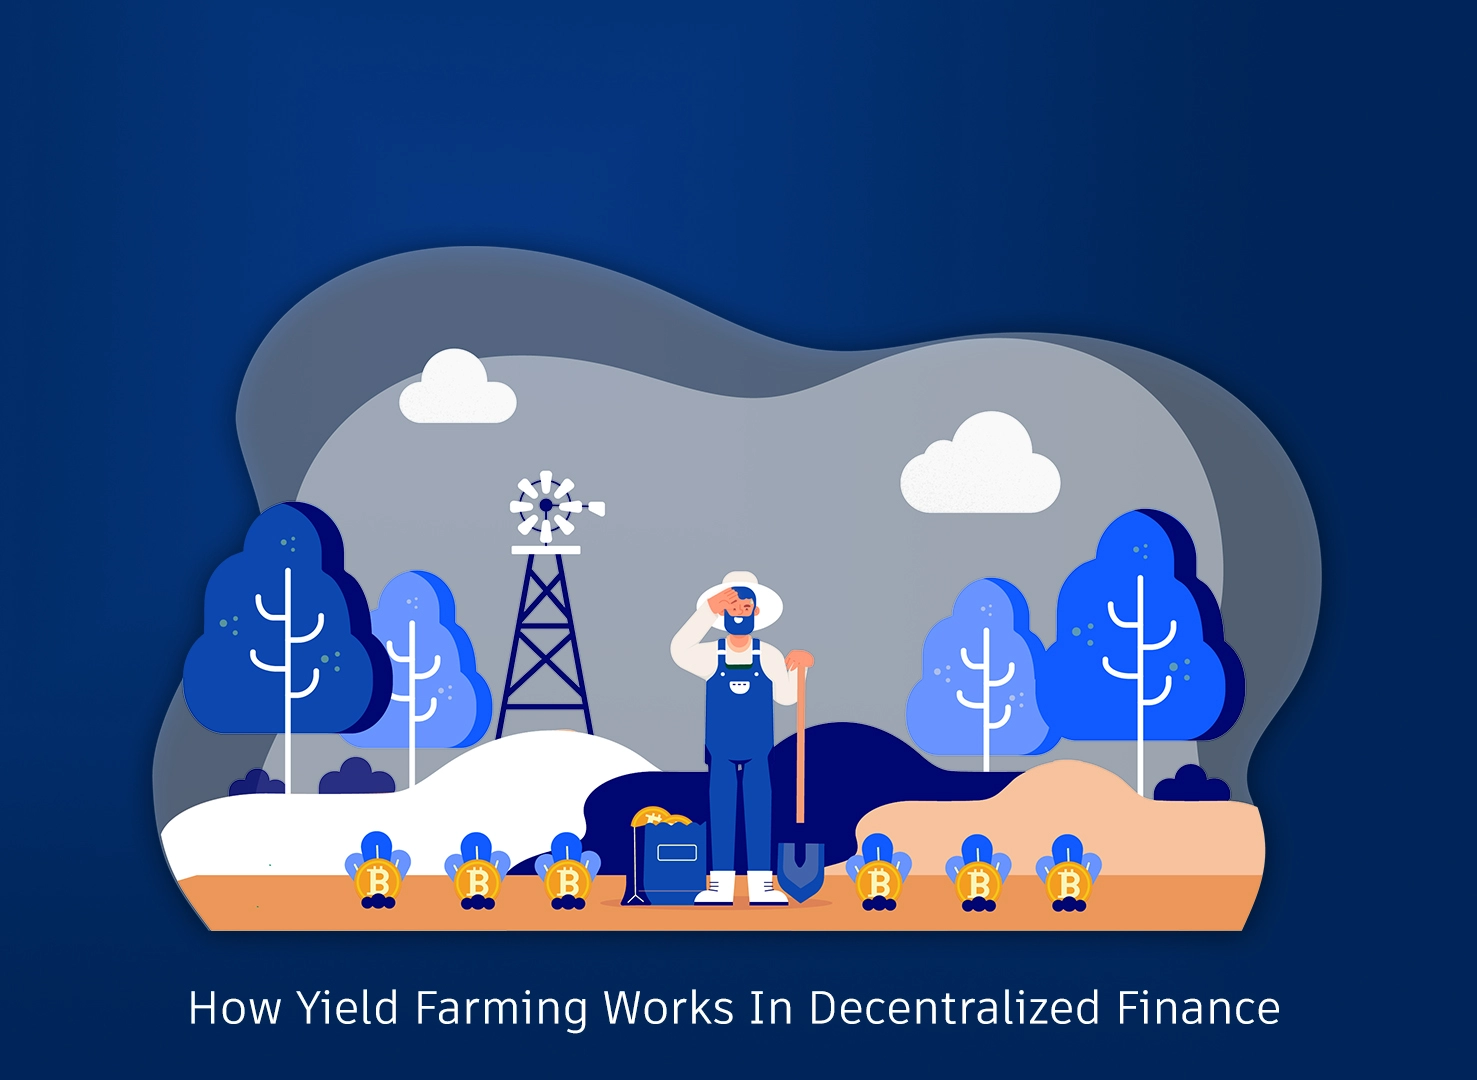 How does Yield Farming work in Decentralized Finance? 